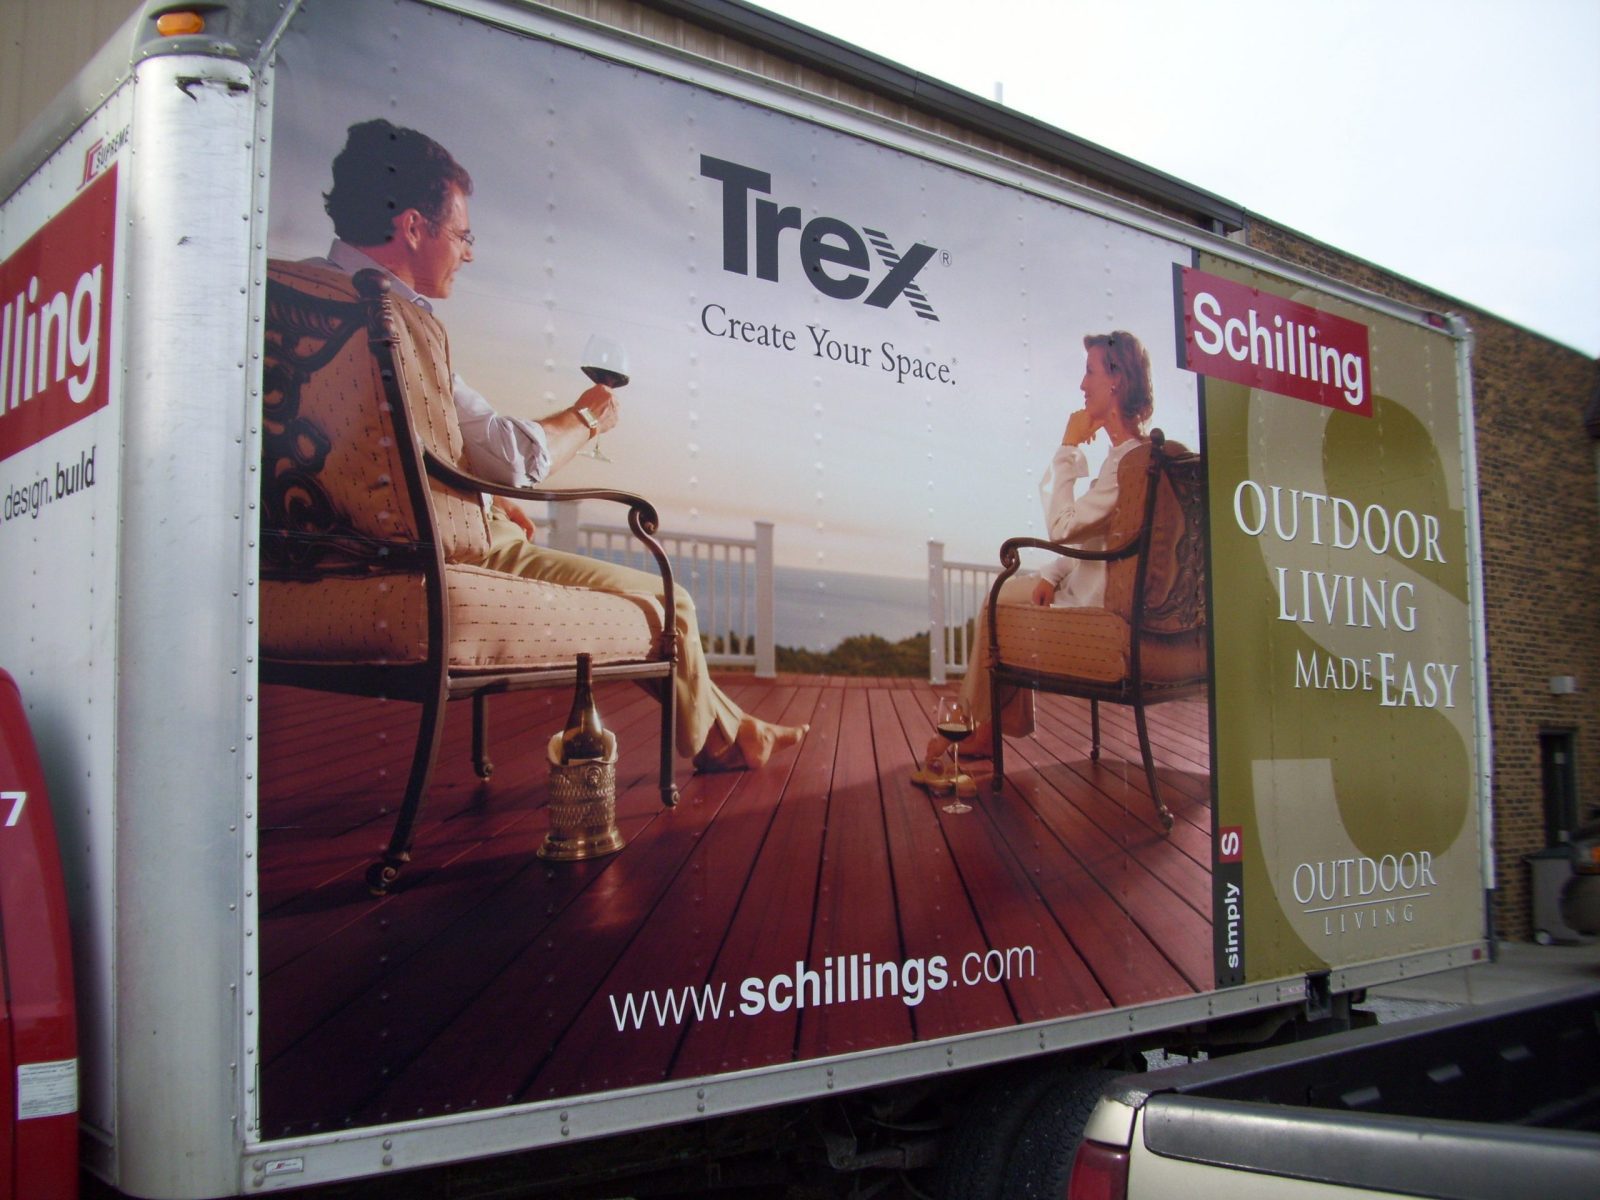 The trailer of a truck displaying a big graphic fleet, representing how one can benefit from calling a Chicago commercial truck lettering company.